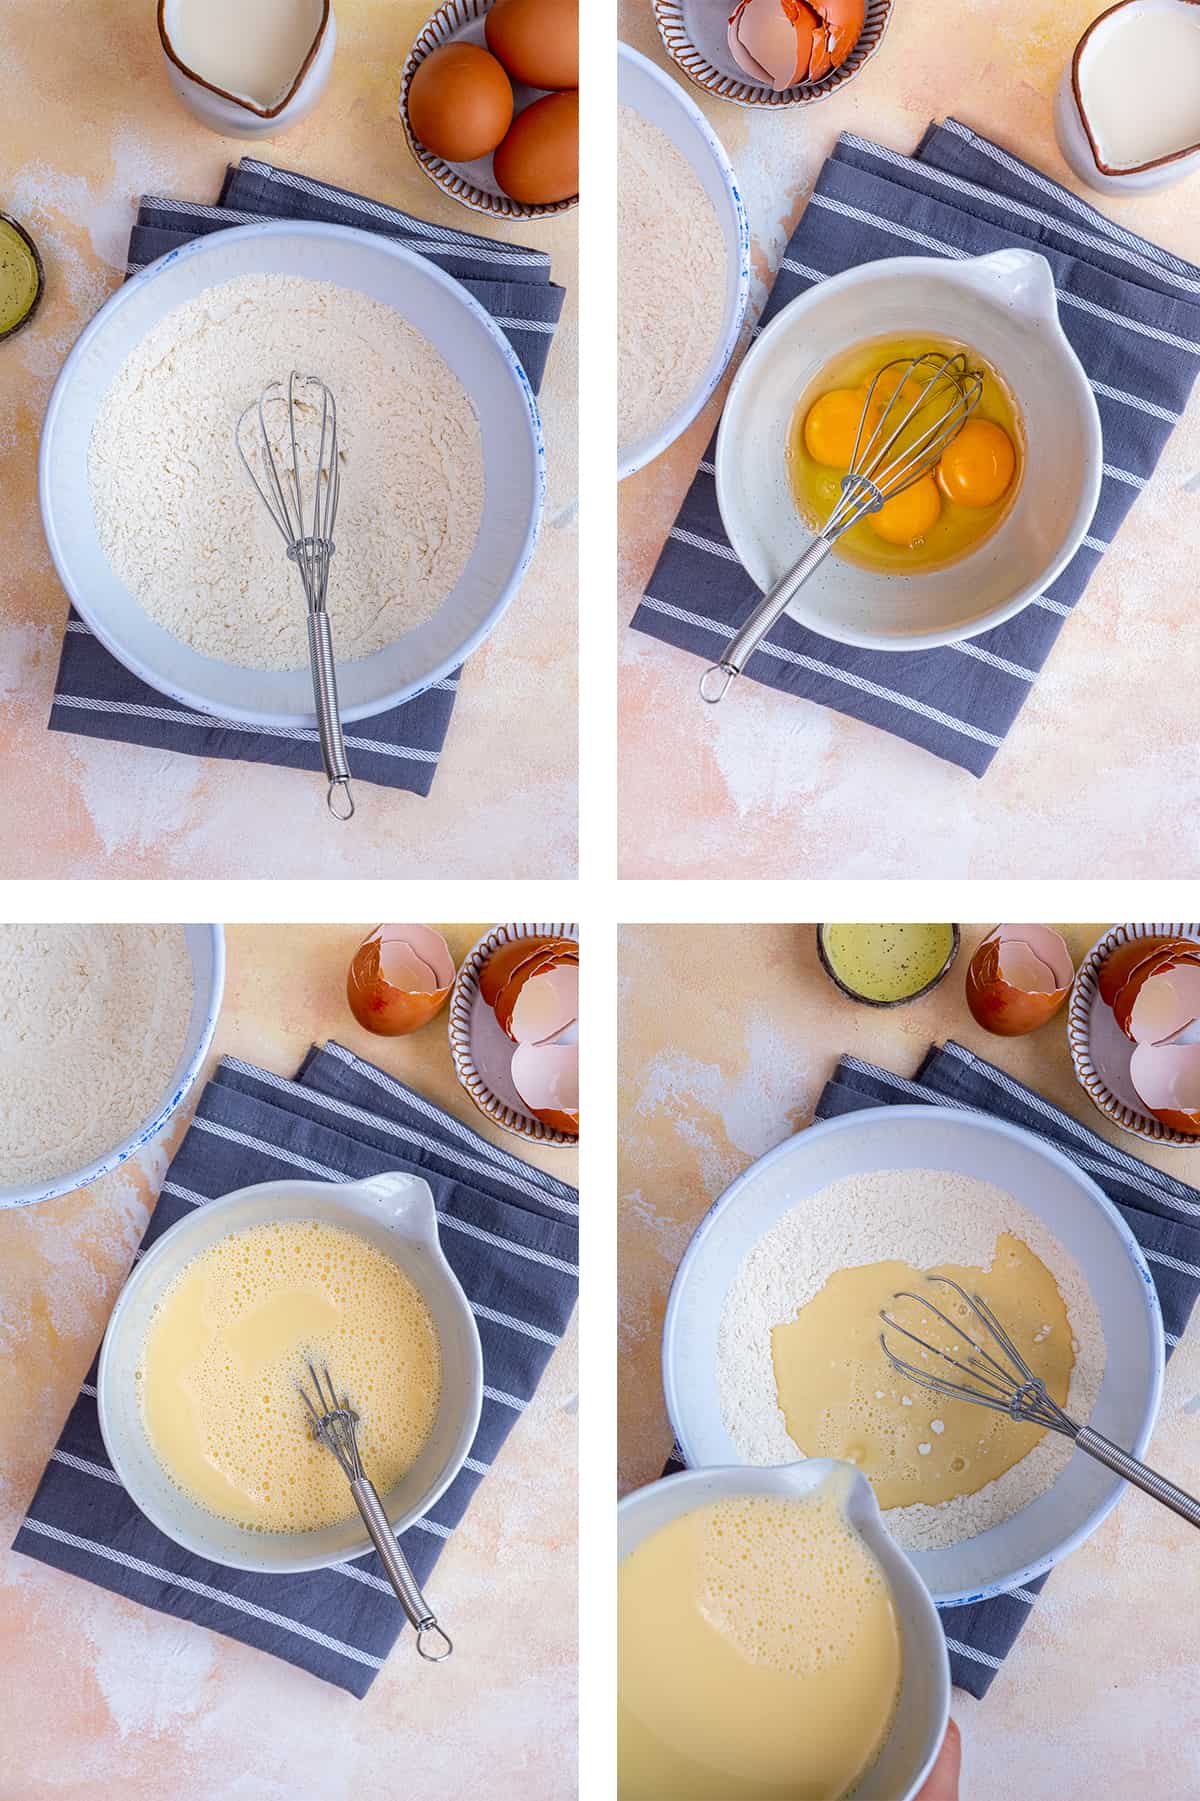 A collage of four pictures showing the steps of preparing the crepe batter.